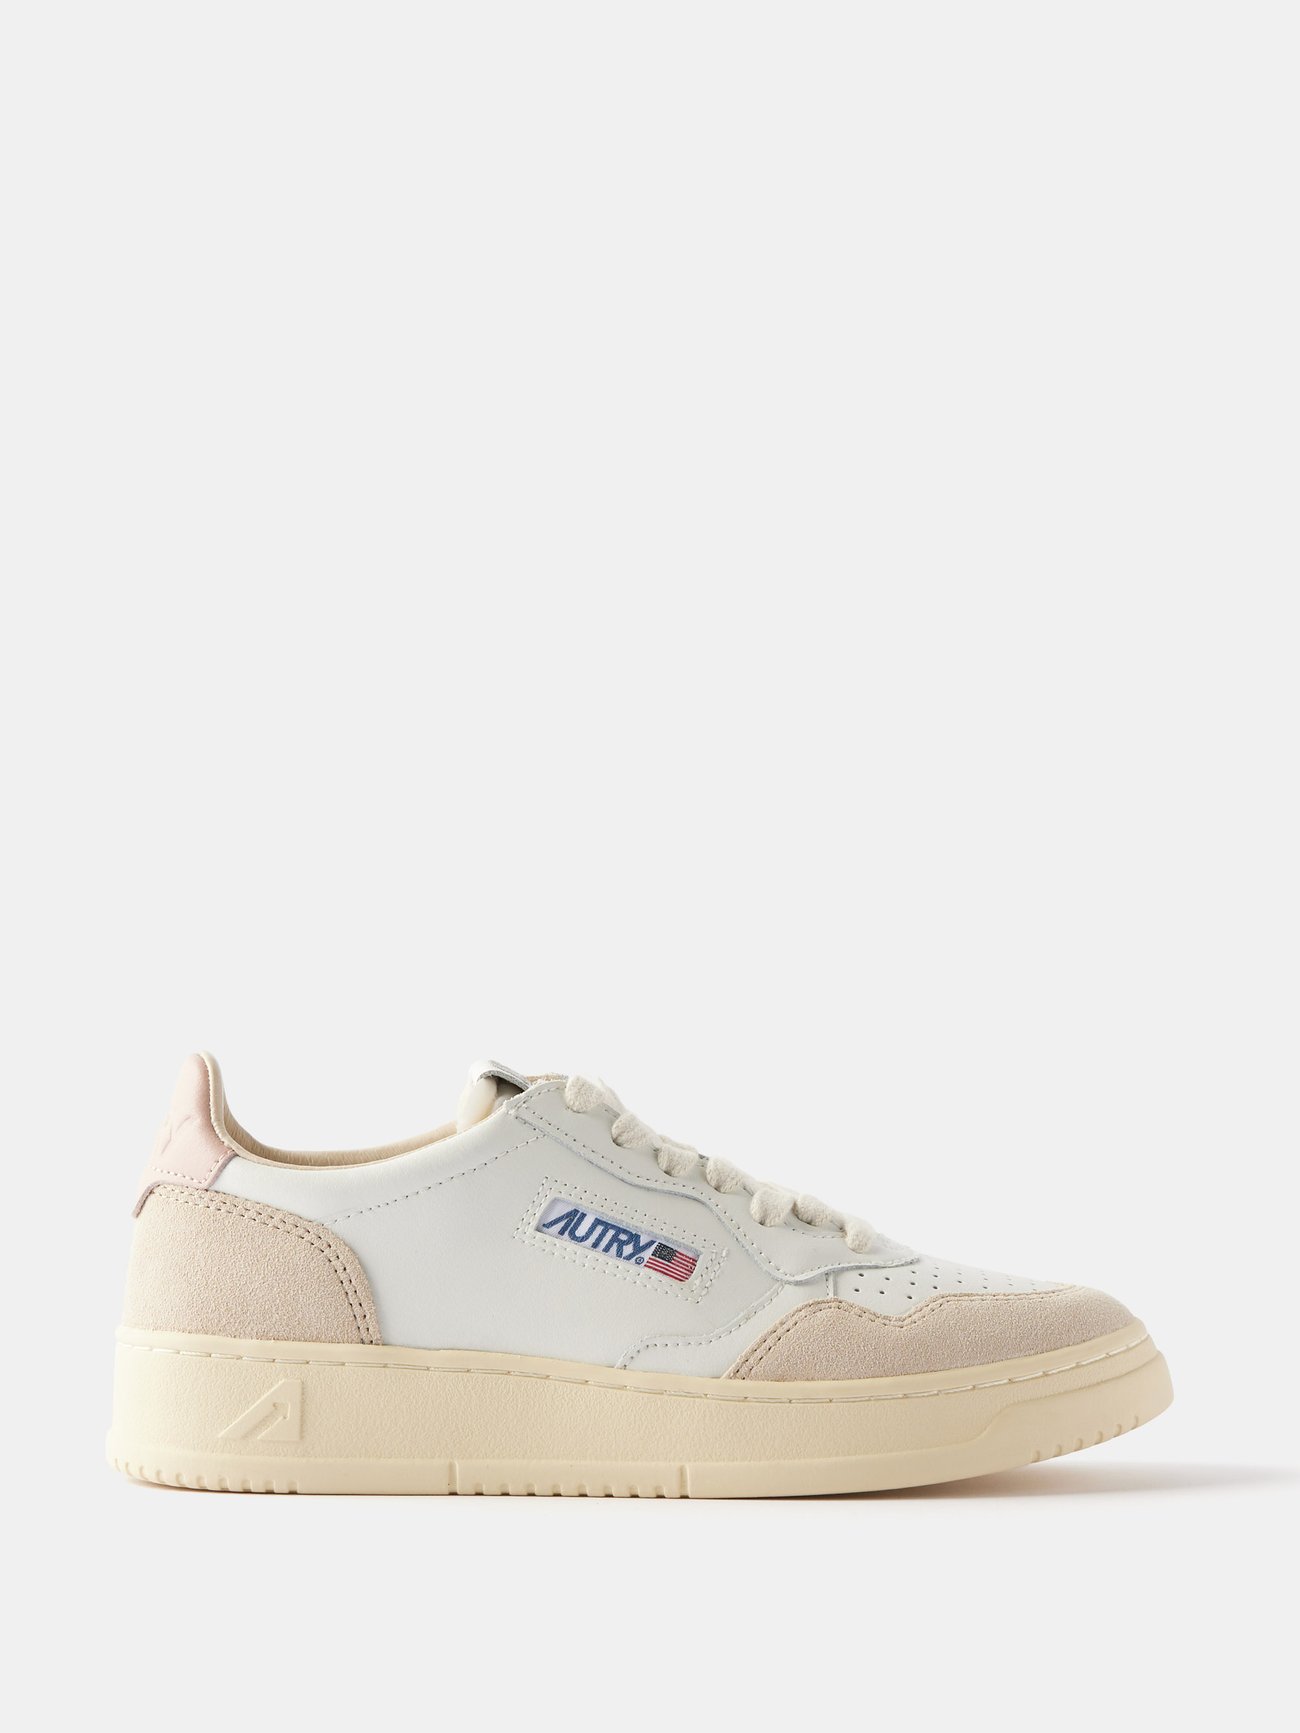 White Medalist leather and suede trainers | Autry | MATCHES UK